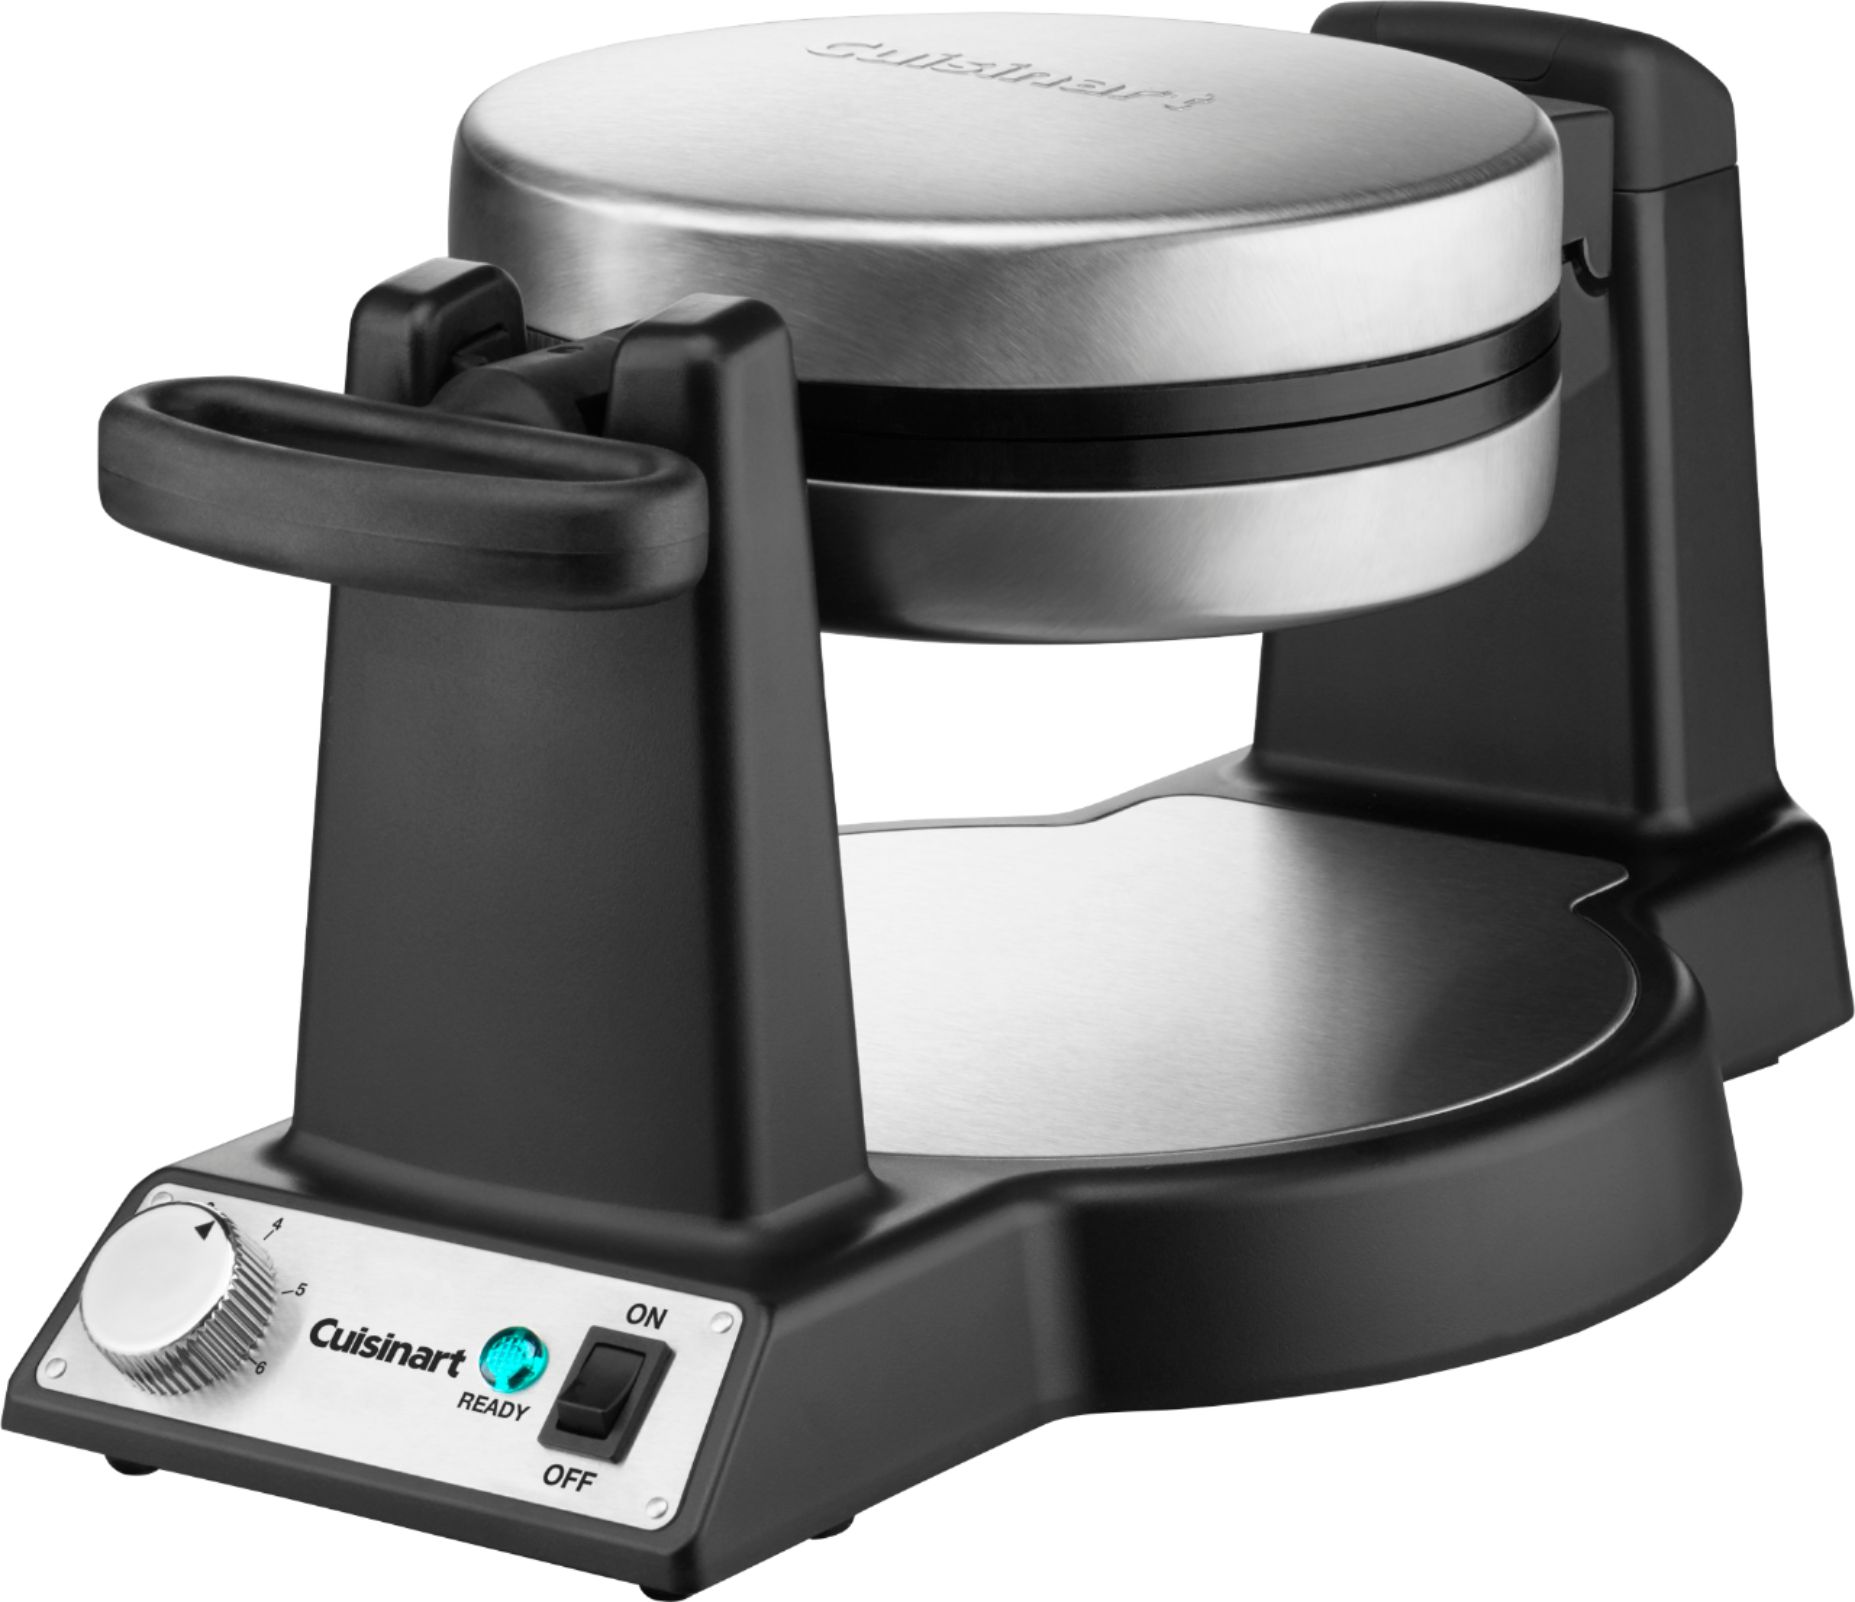 Angle View: Cuisinart - Belgian 4 Triangle Waffles Flip Waffle Maker - Brushed Stainless Steel